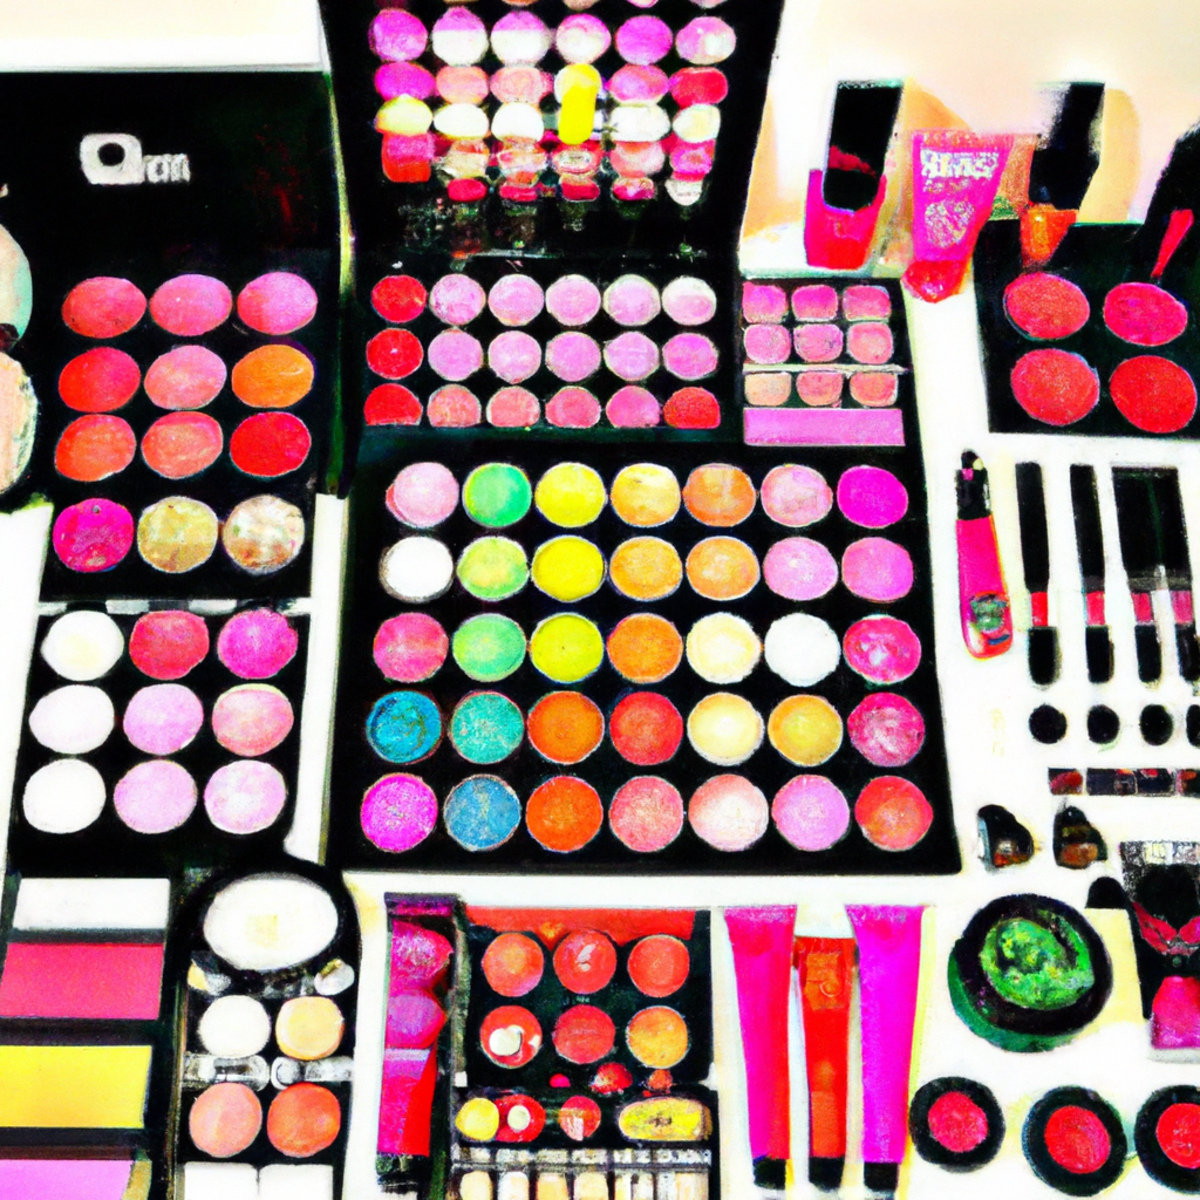 Vibrant and energetic scene of neon-colored makeup products, creating a visually stunning composition.